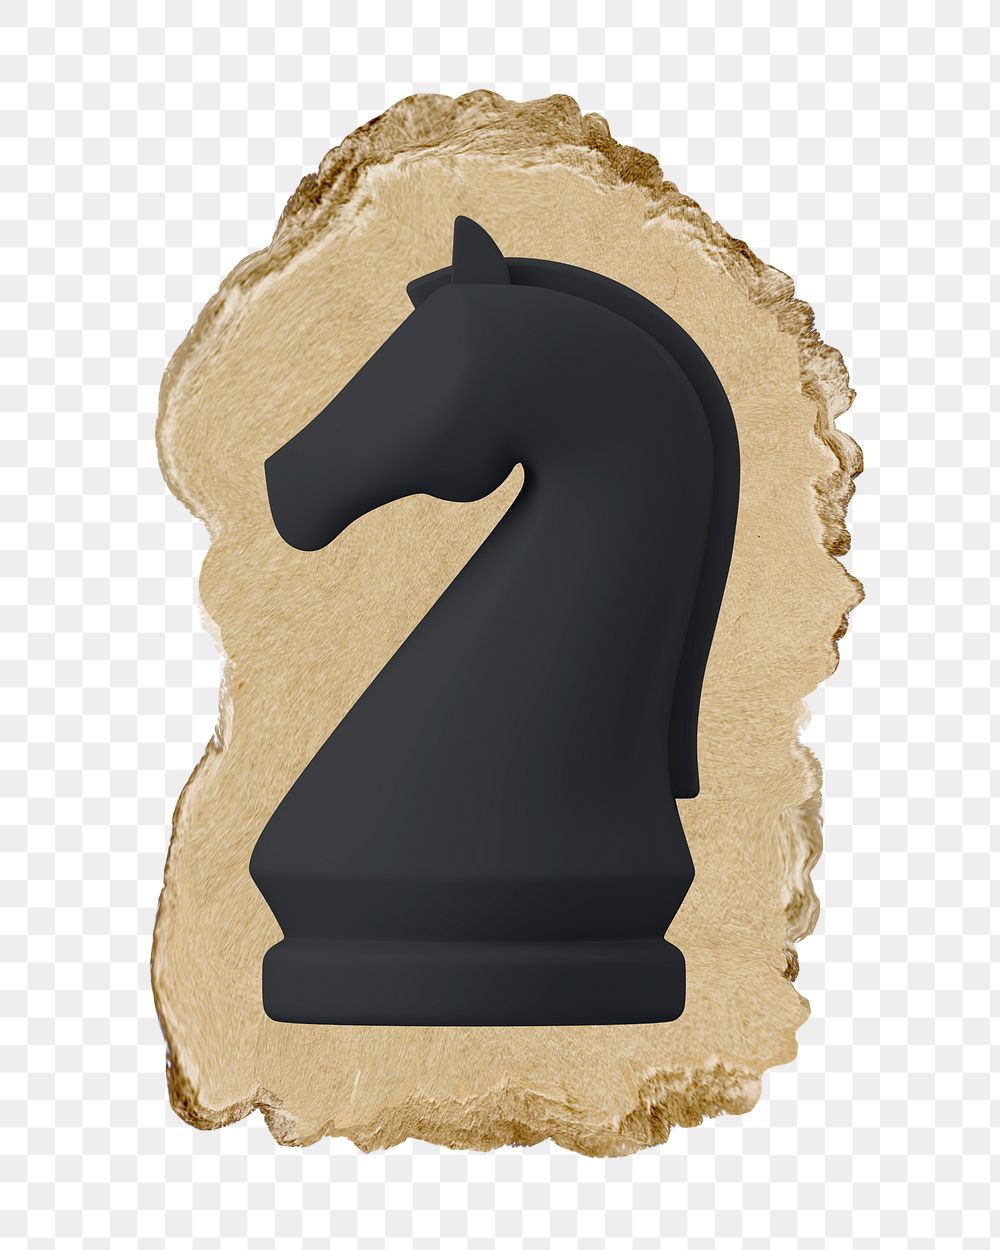 3D chess piece png sticker, ripped paper, transparent background